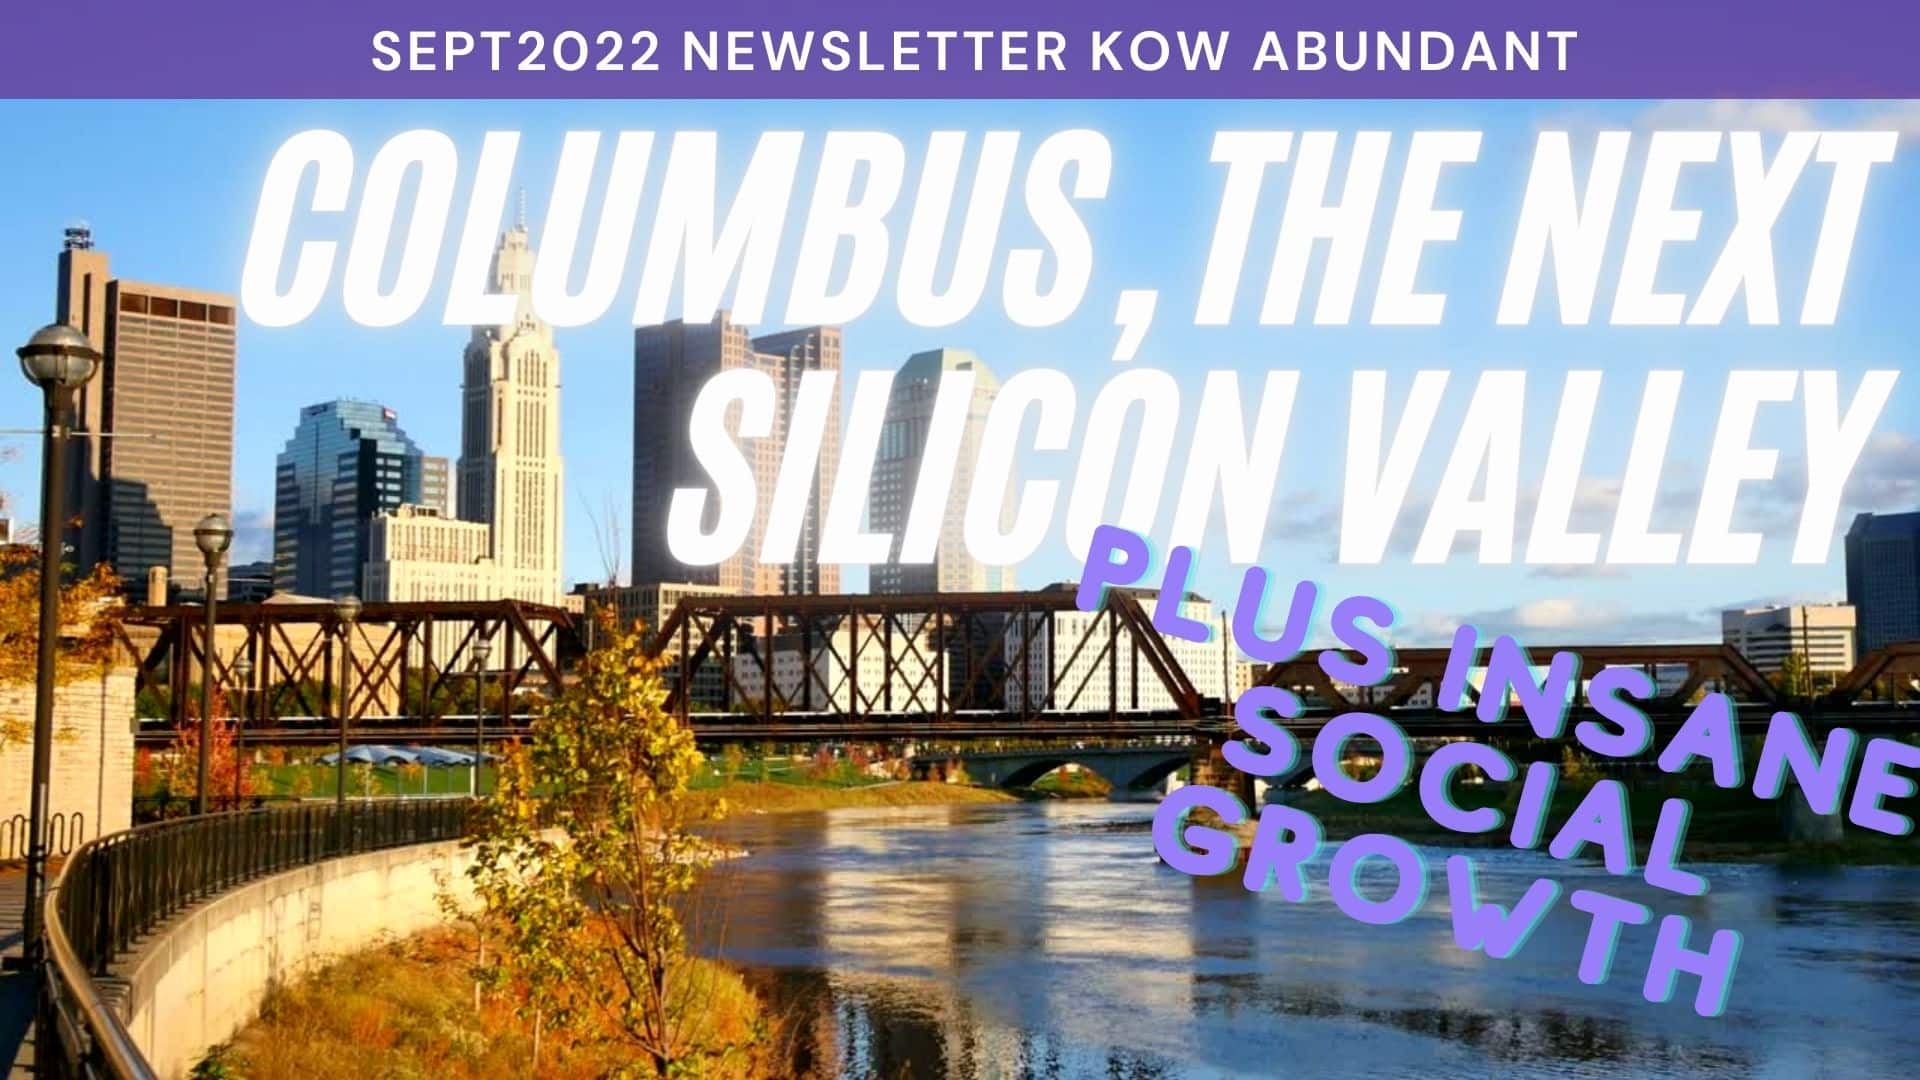 Sept 2022 Newsletter, Columbus The next Silicon Valley